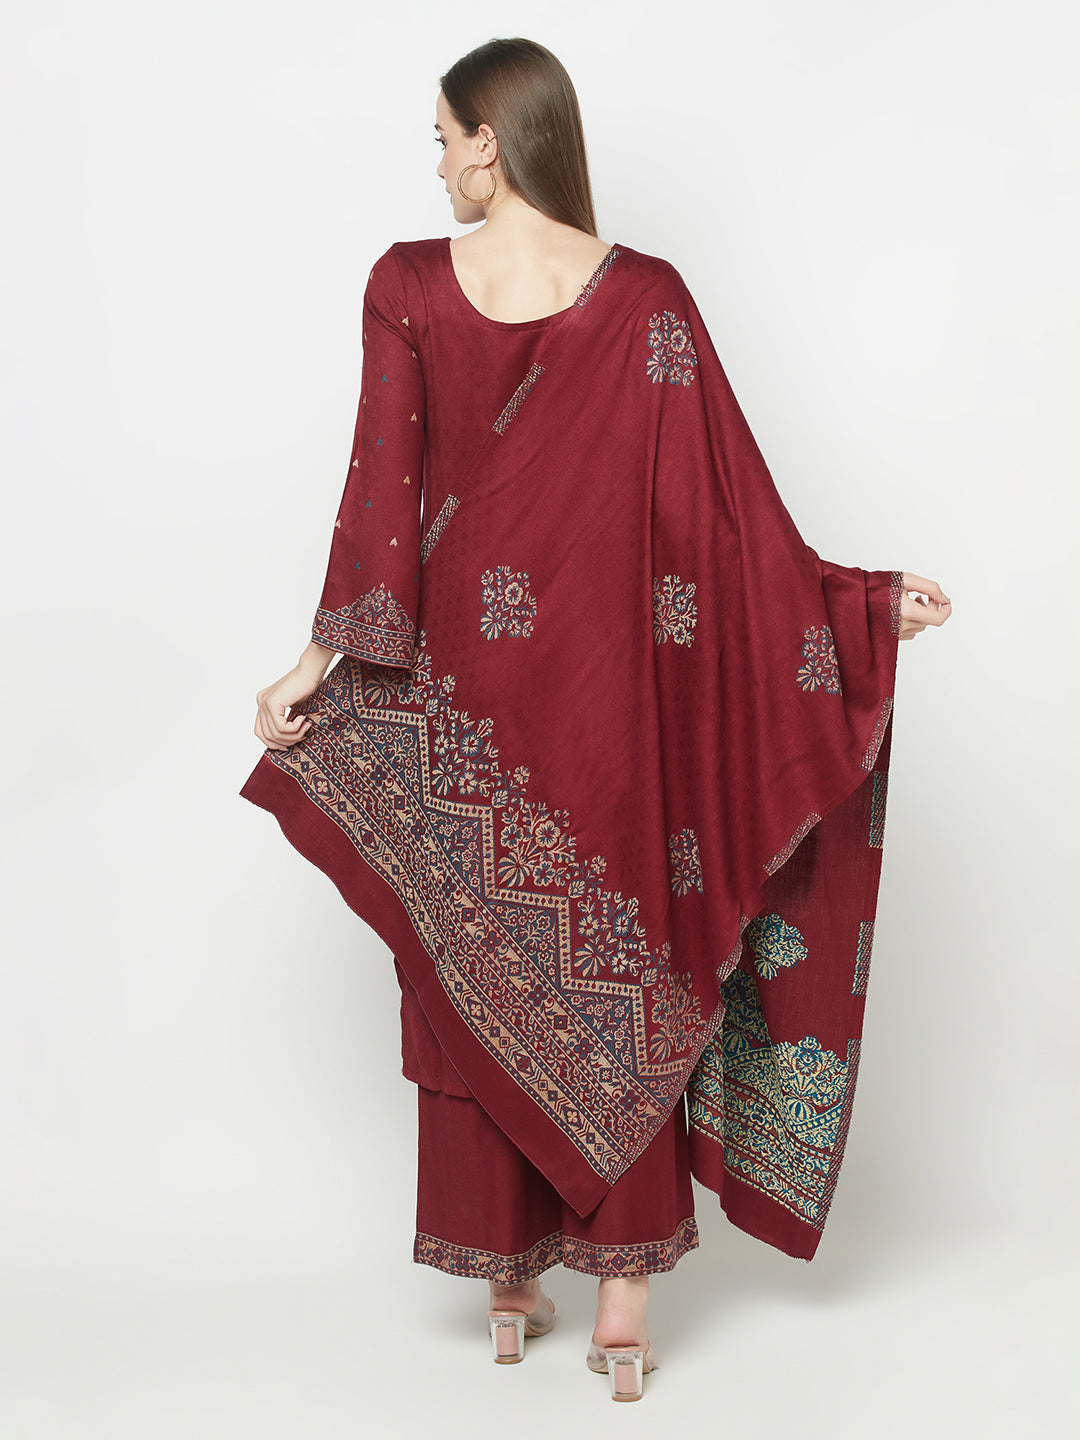 Acro Wool Maroon Dress Material with Stole